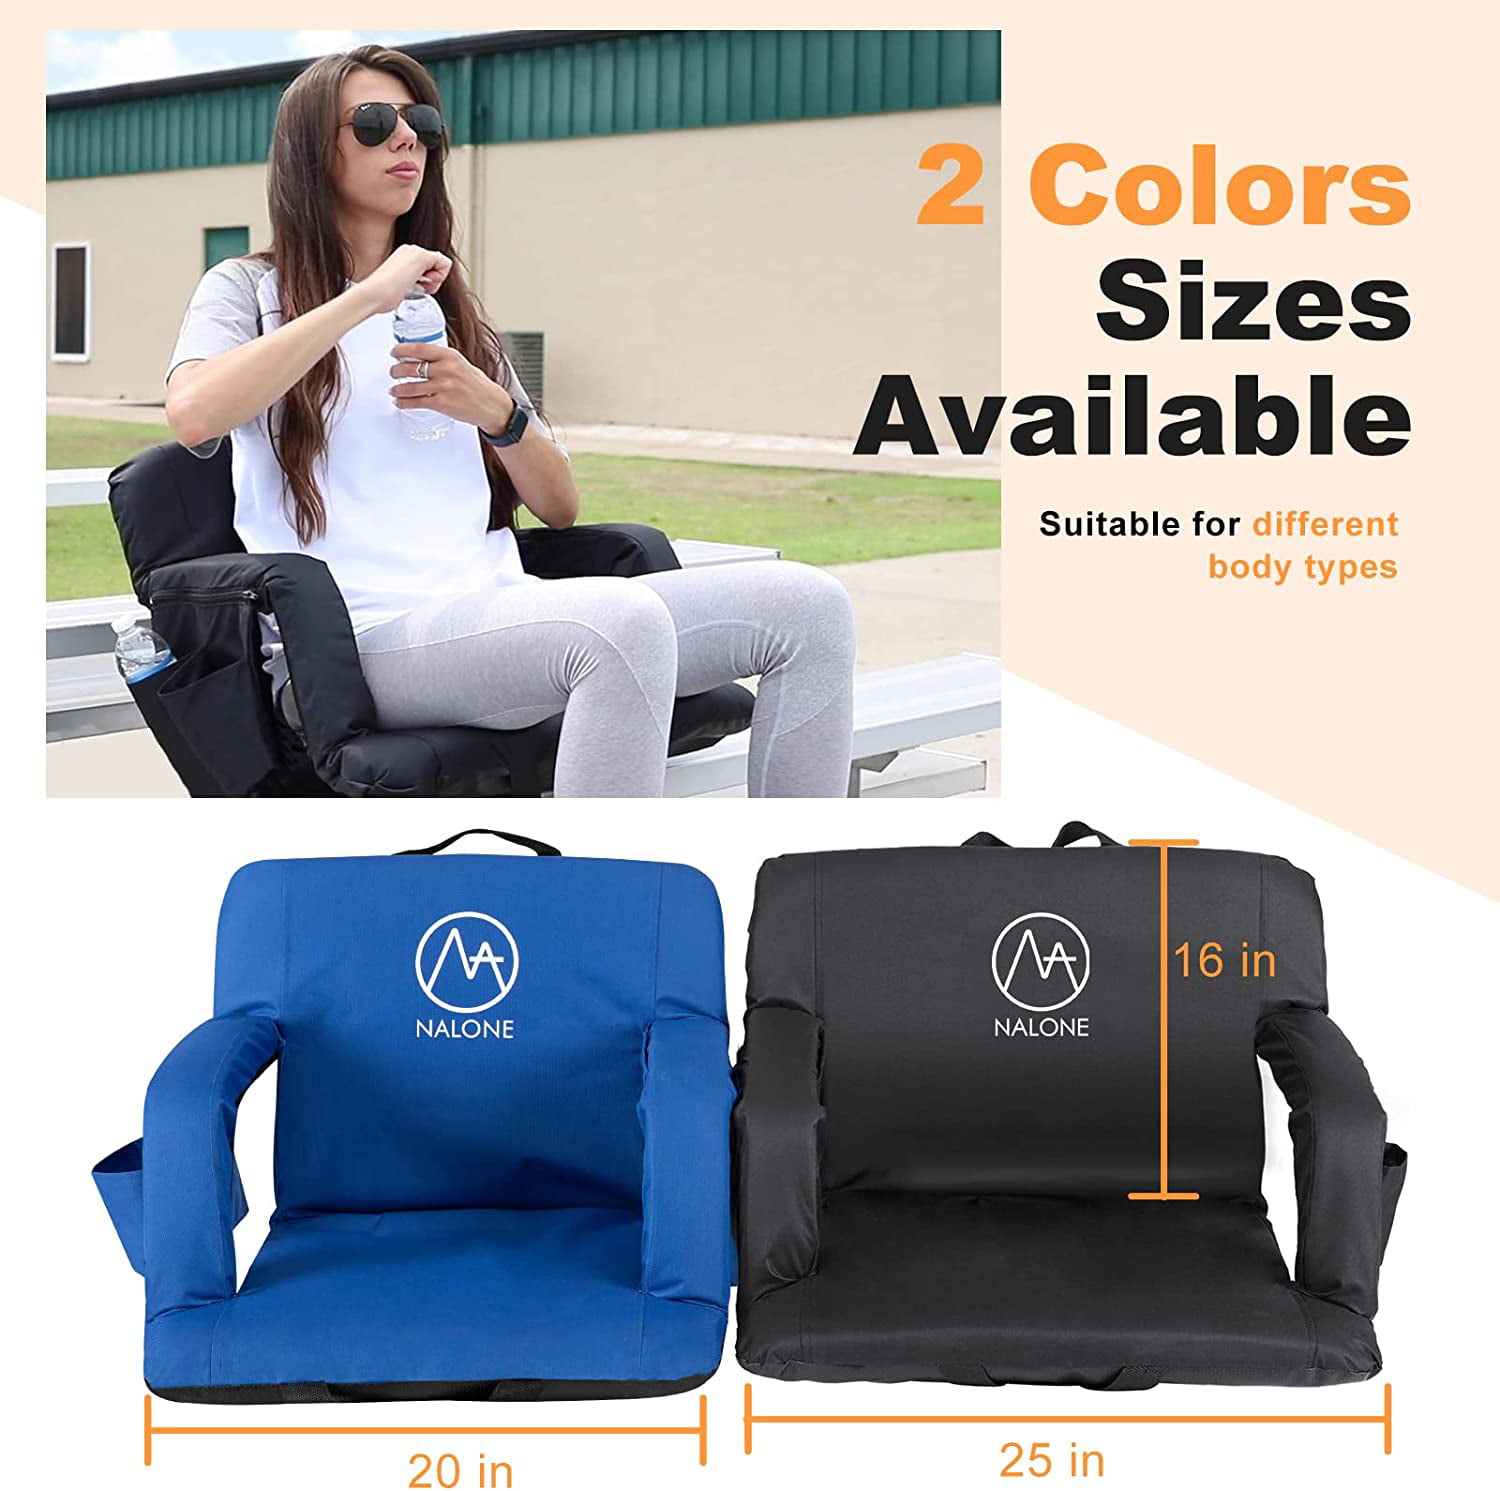 Thyle 2 Pcs Stadium Seats Cushion 20 Inch Wide Folding Floor Bench Seats  Waterproof Cushion Chair for Bleacher with Back Support, 6 Reclining